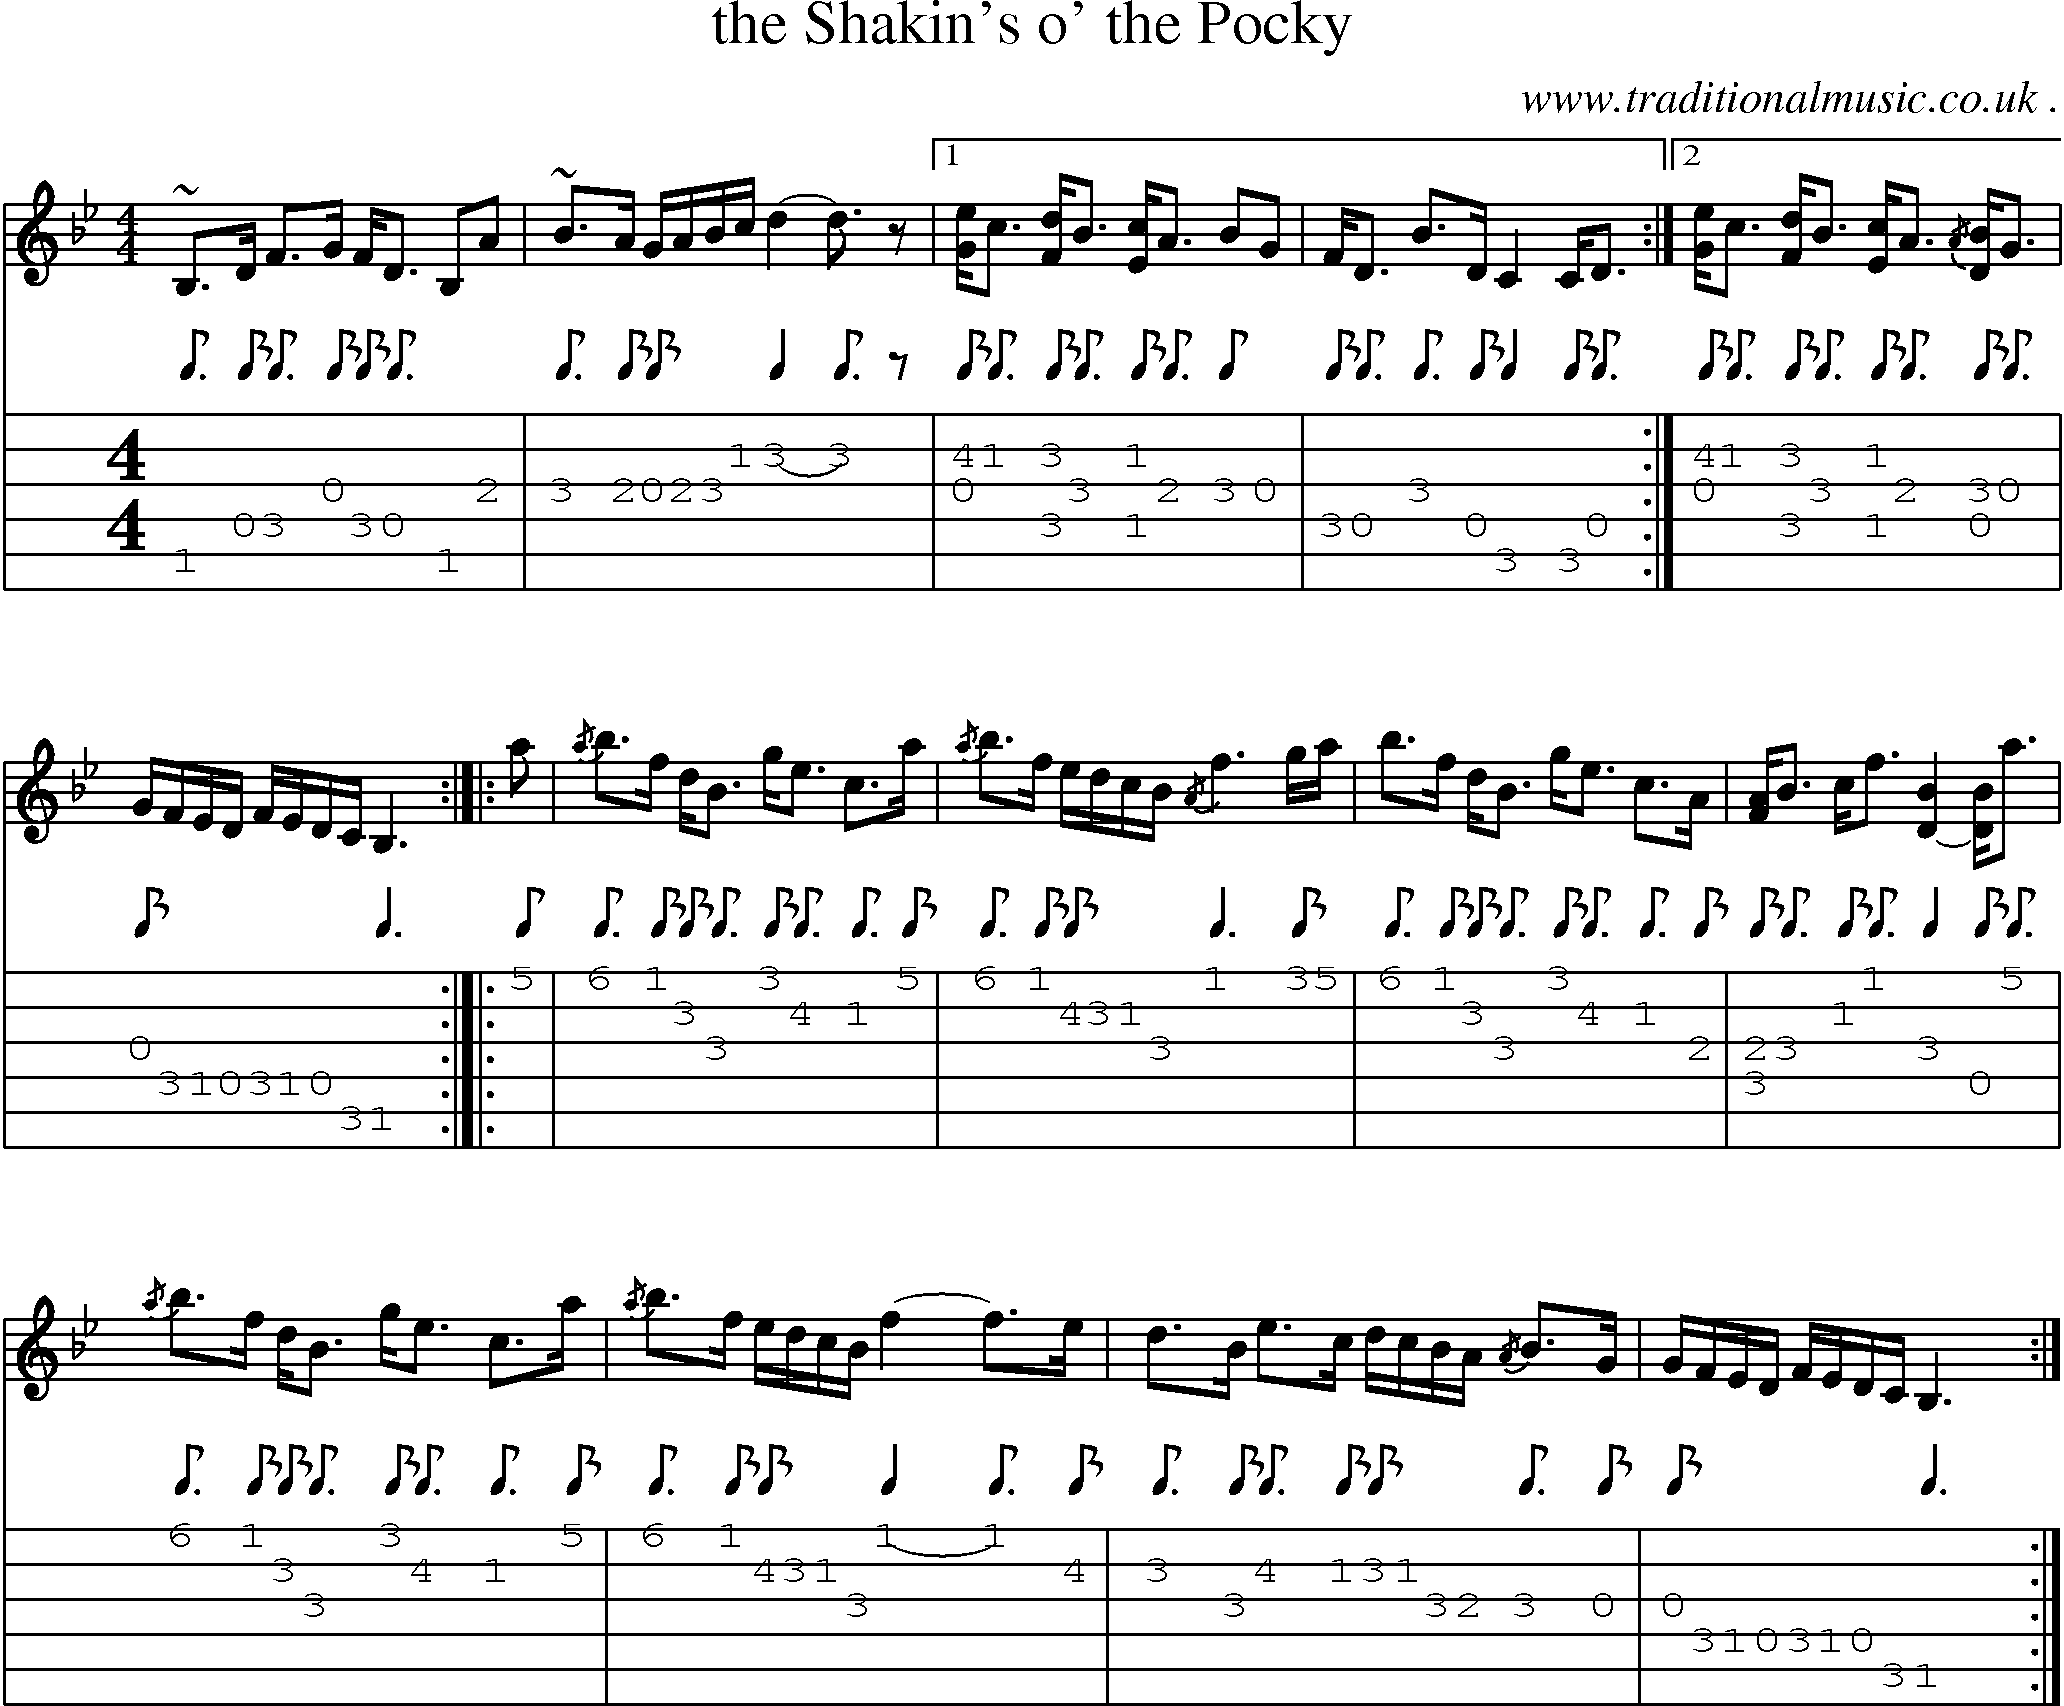 Sheet-music  score, Chords and Guitar Tabs for The Shakins O The Pocky